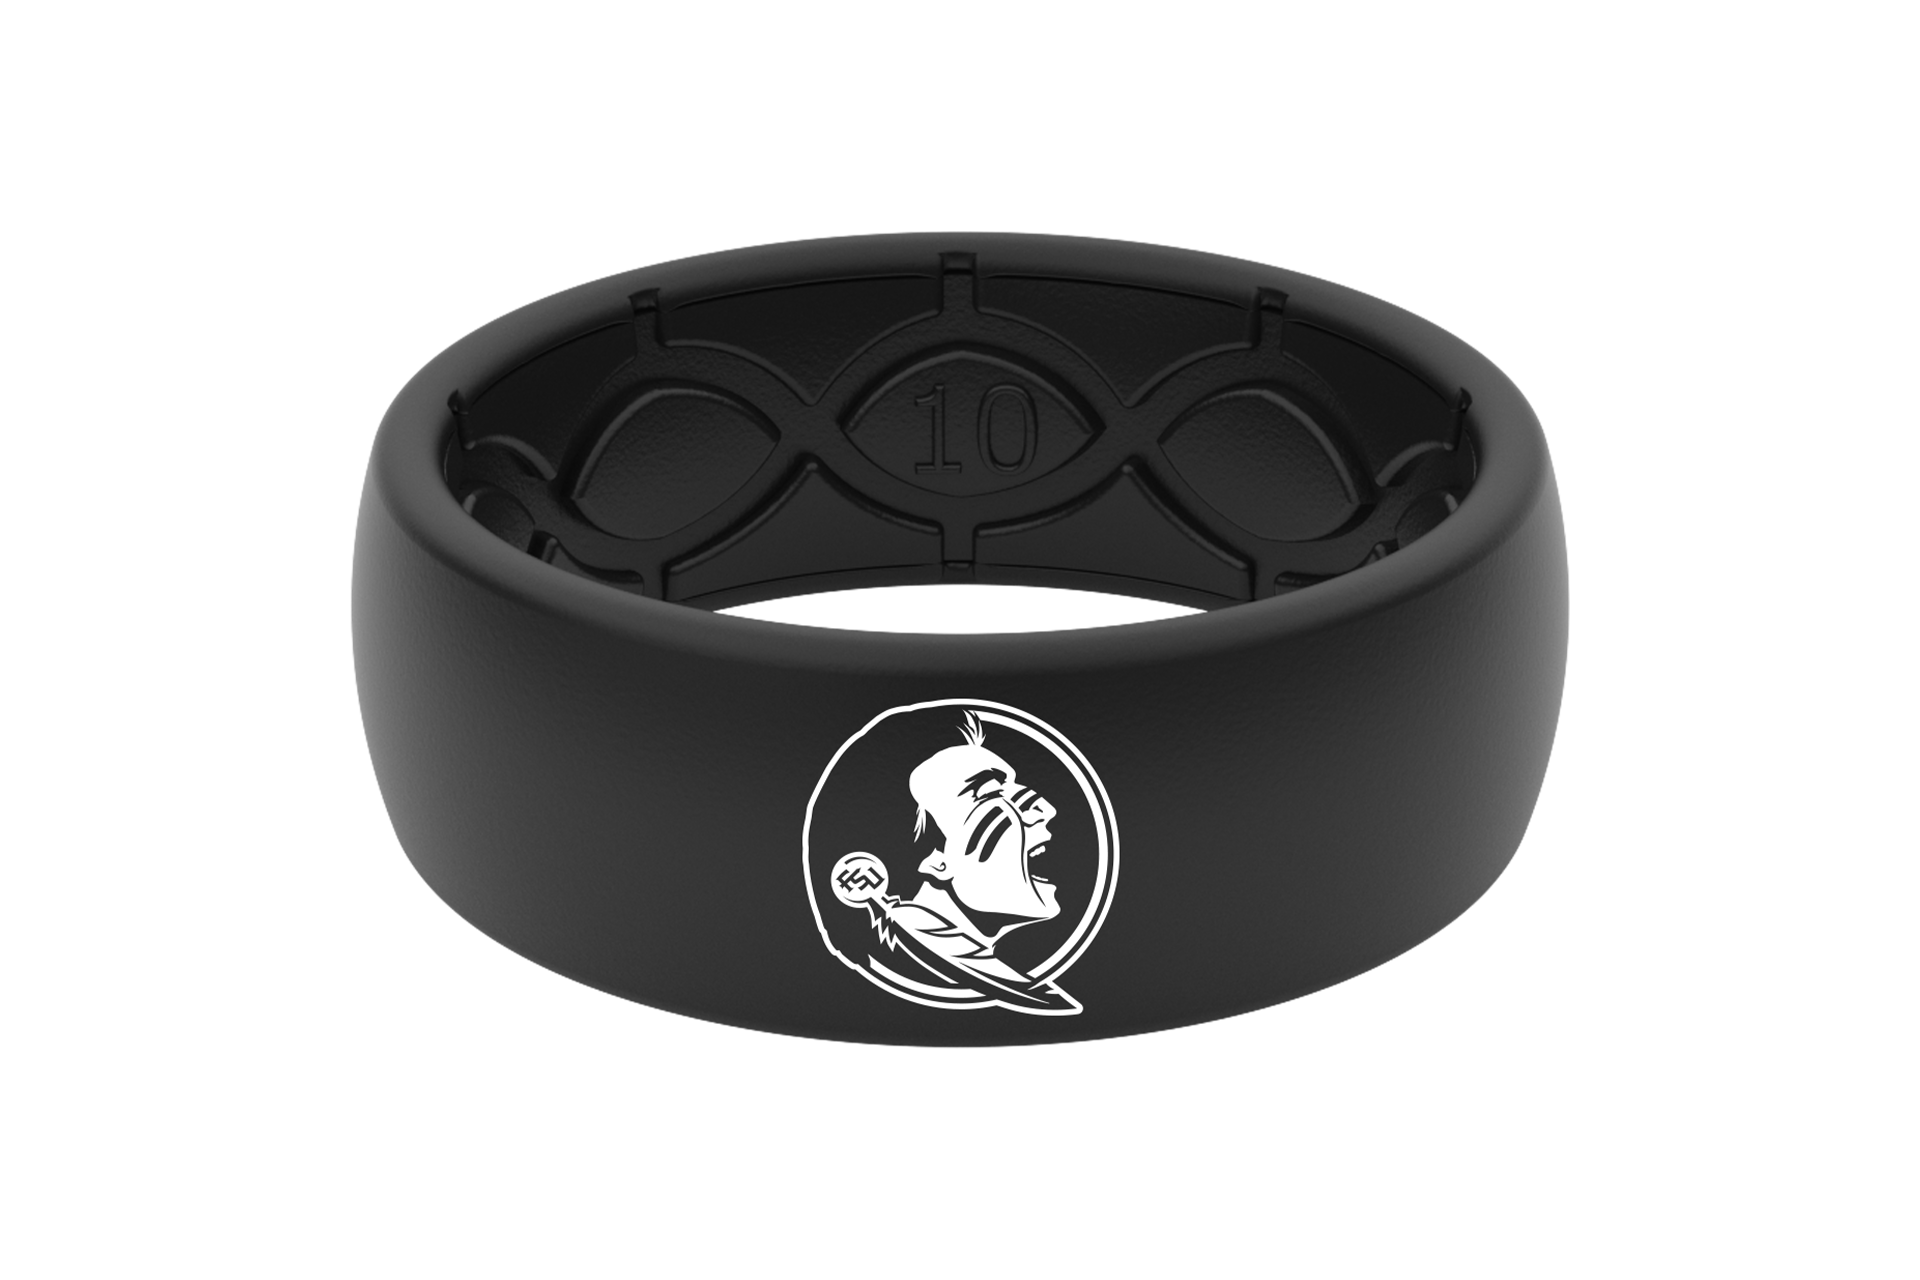 Florida state ring black and white view 1 PNG